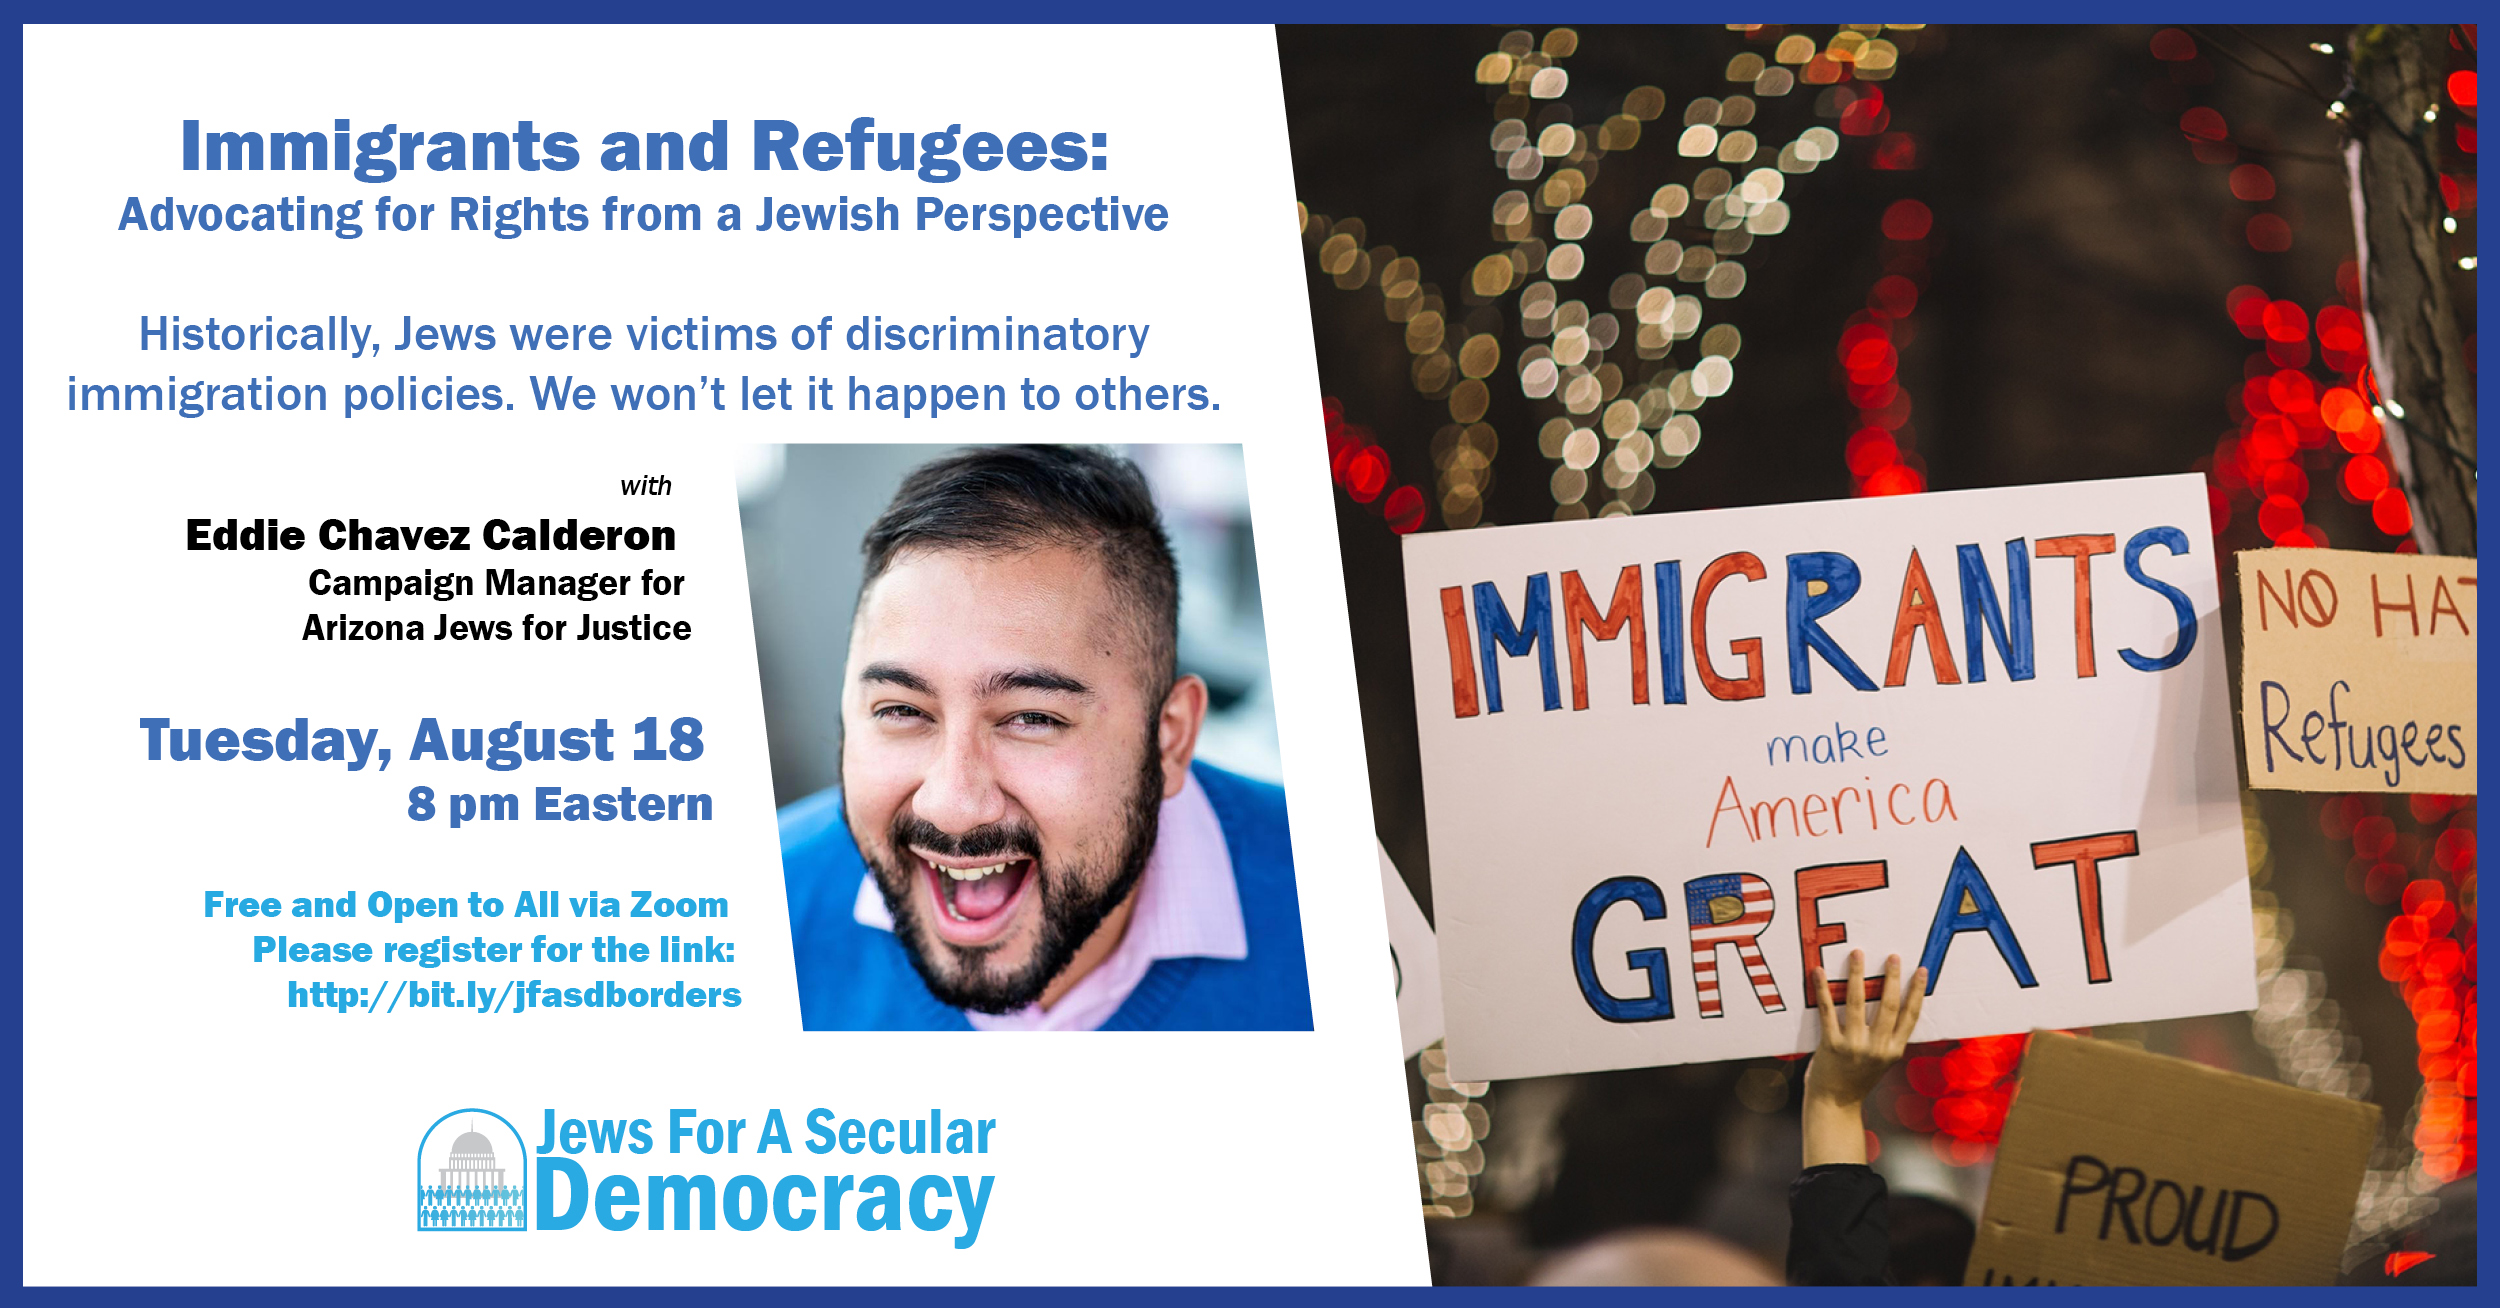 Immigrants and Refugees: Advocating for Rights from a Jewish Perspective